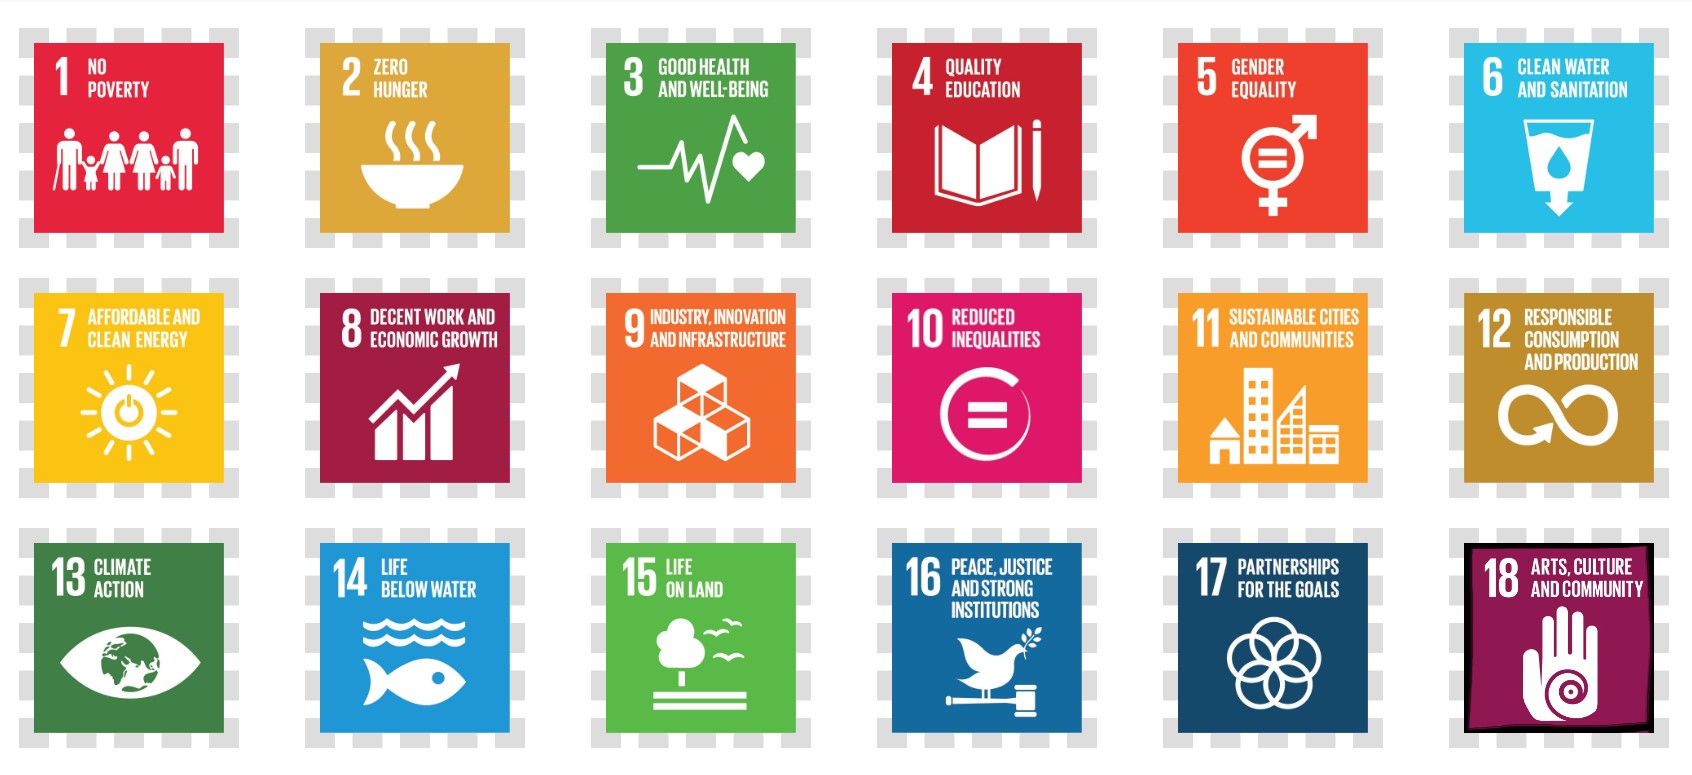 Screen capture of the SDG icons on the website SDGMarin.org